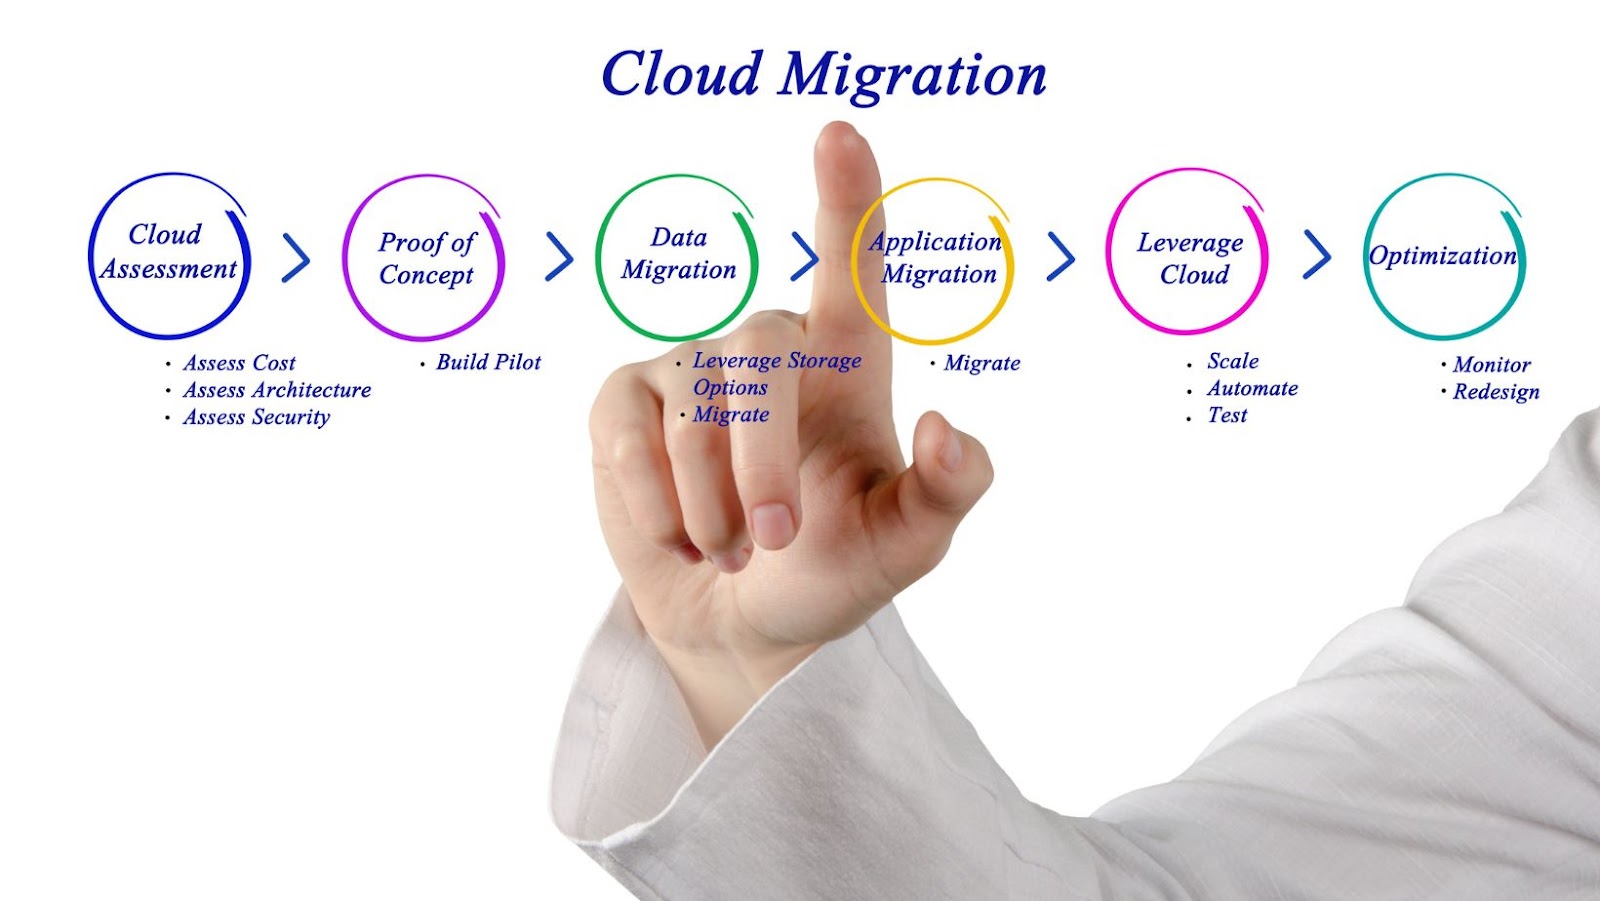 What Do You Need for Successful Cloud Migration